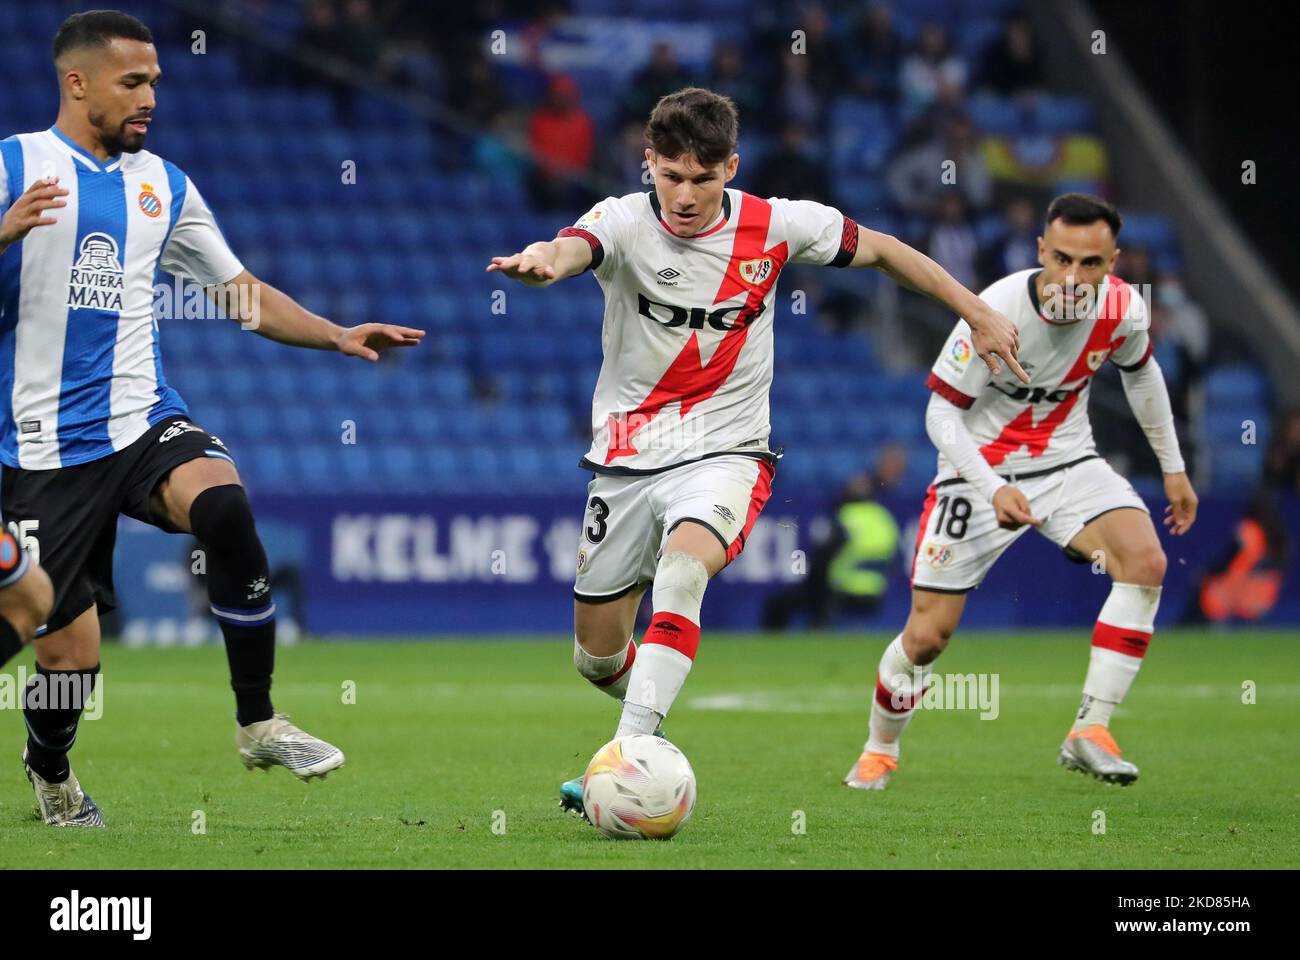 Francisco Garcia during the match between RCD Espanyol and Rayo Vallecano, corresponding to the week 33 of the Liga Santander, played at the RCDE Stadium, in Barcelona, on 21th April 2022. (Photo by Joan Valls/Urbanandsport /NurPhoto) Stock Photo